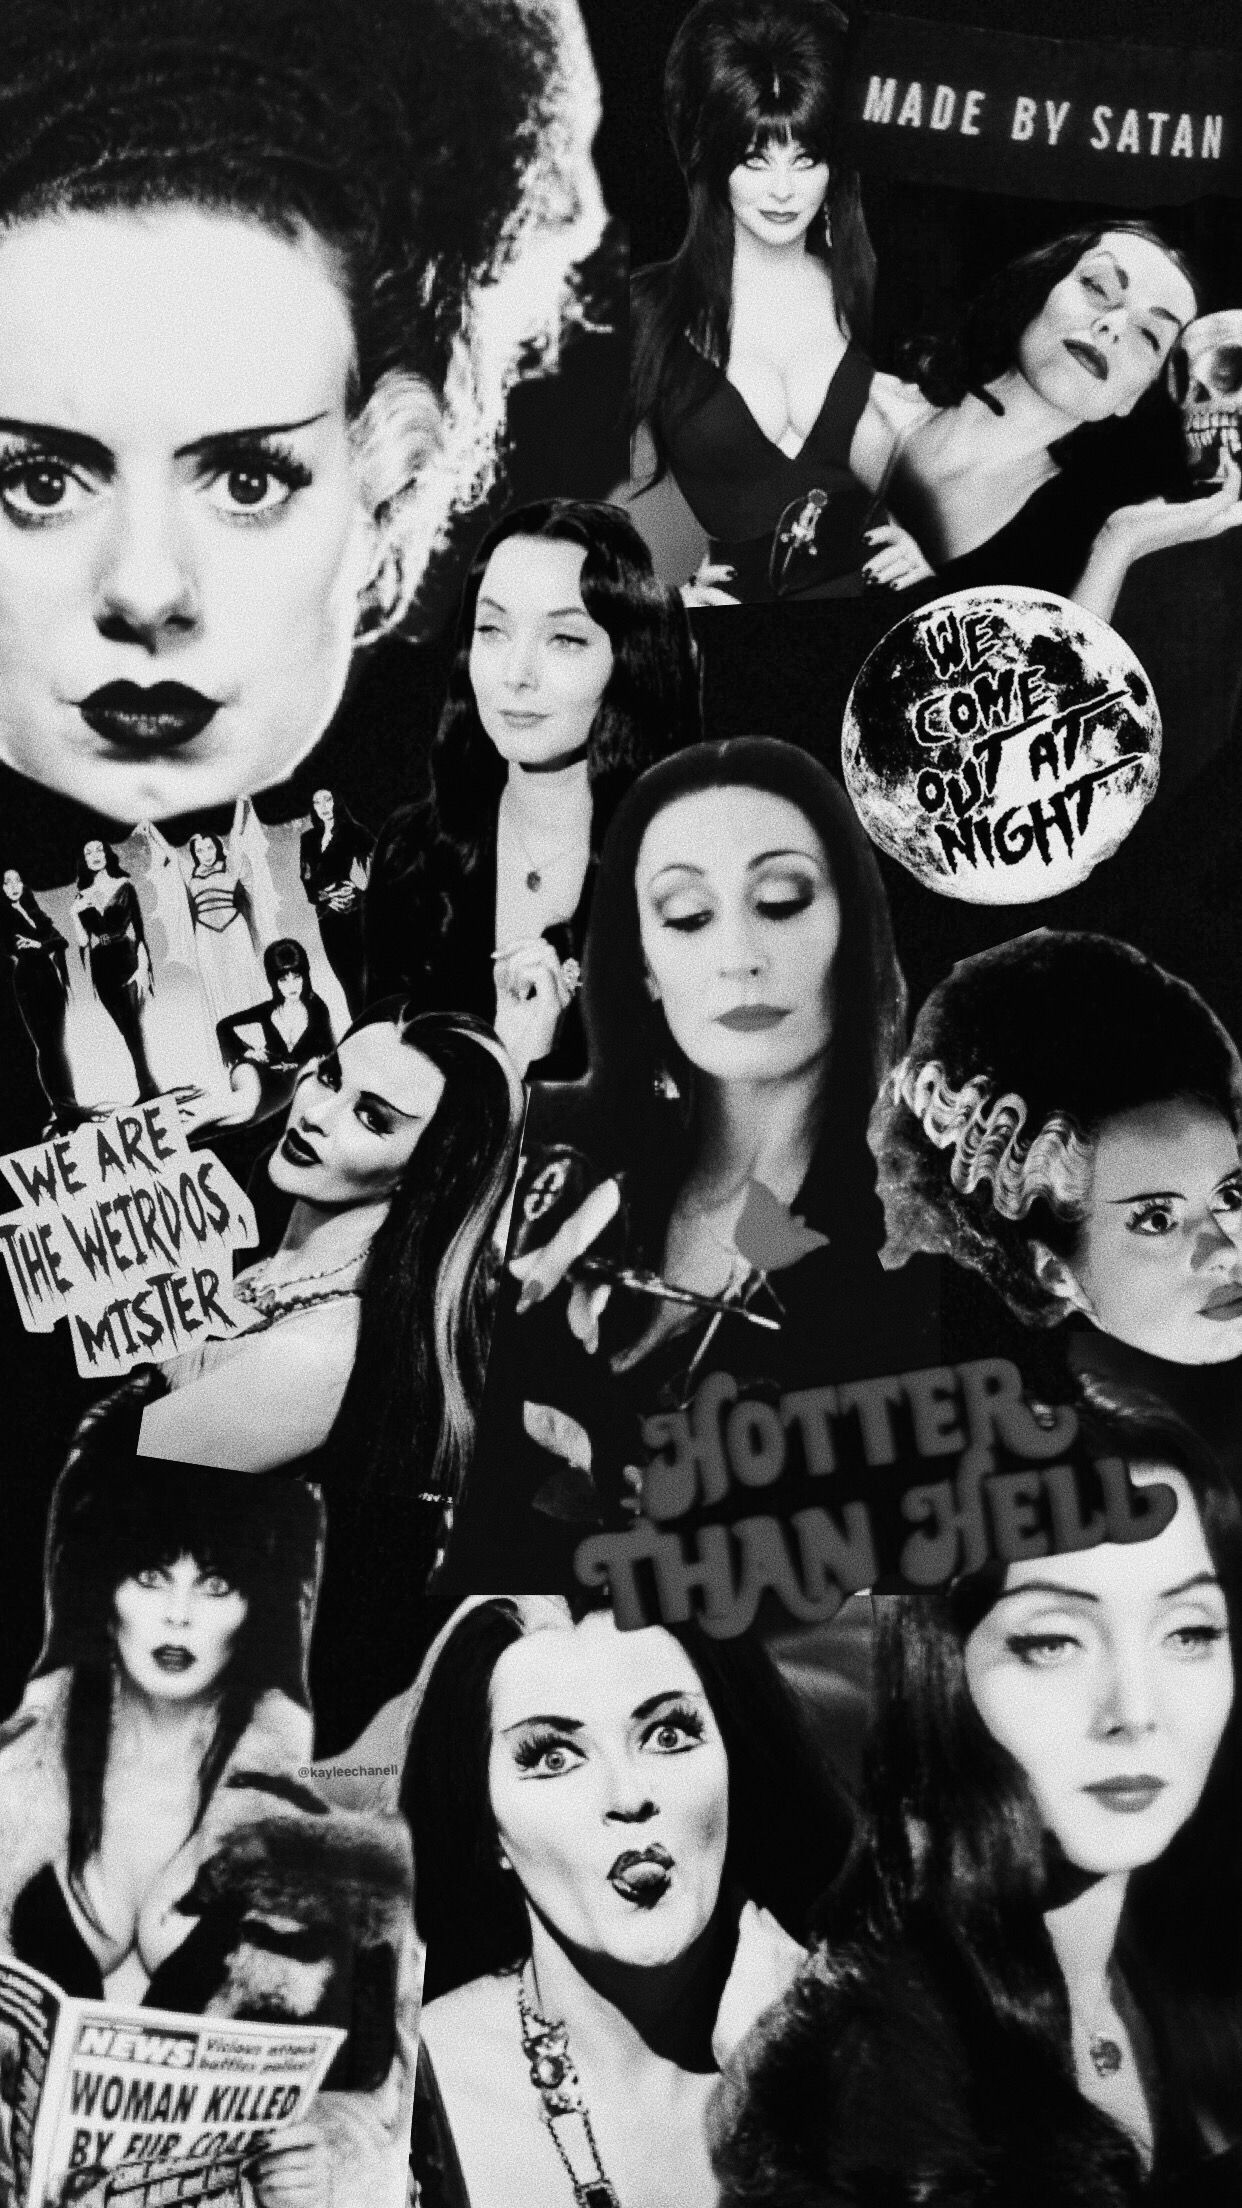 Elvira, Vampira, Lily Munster, Morticia Addams, and Bride Of Frankenstein. The goth icons